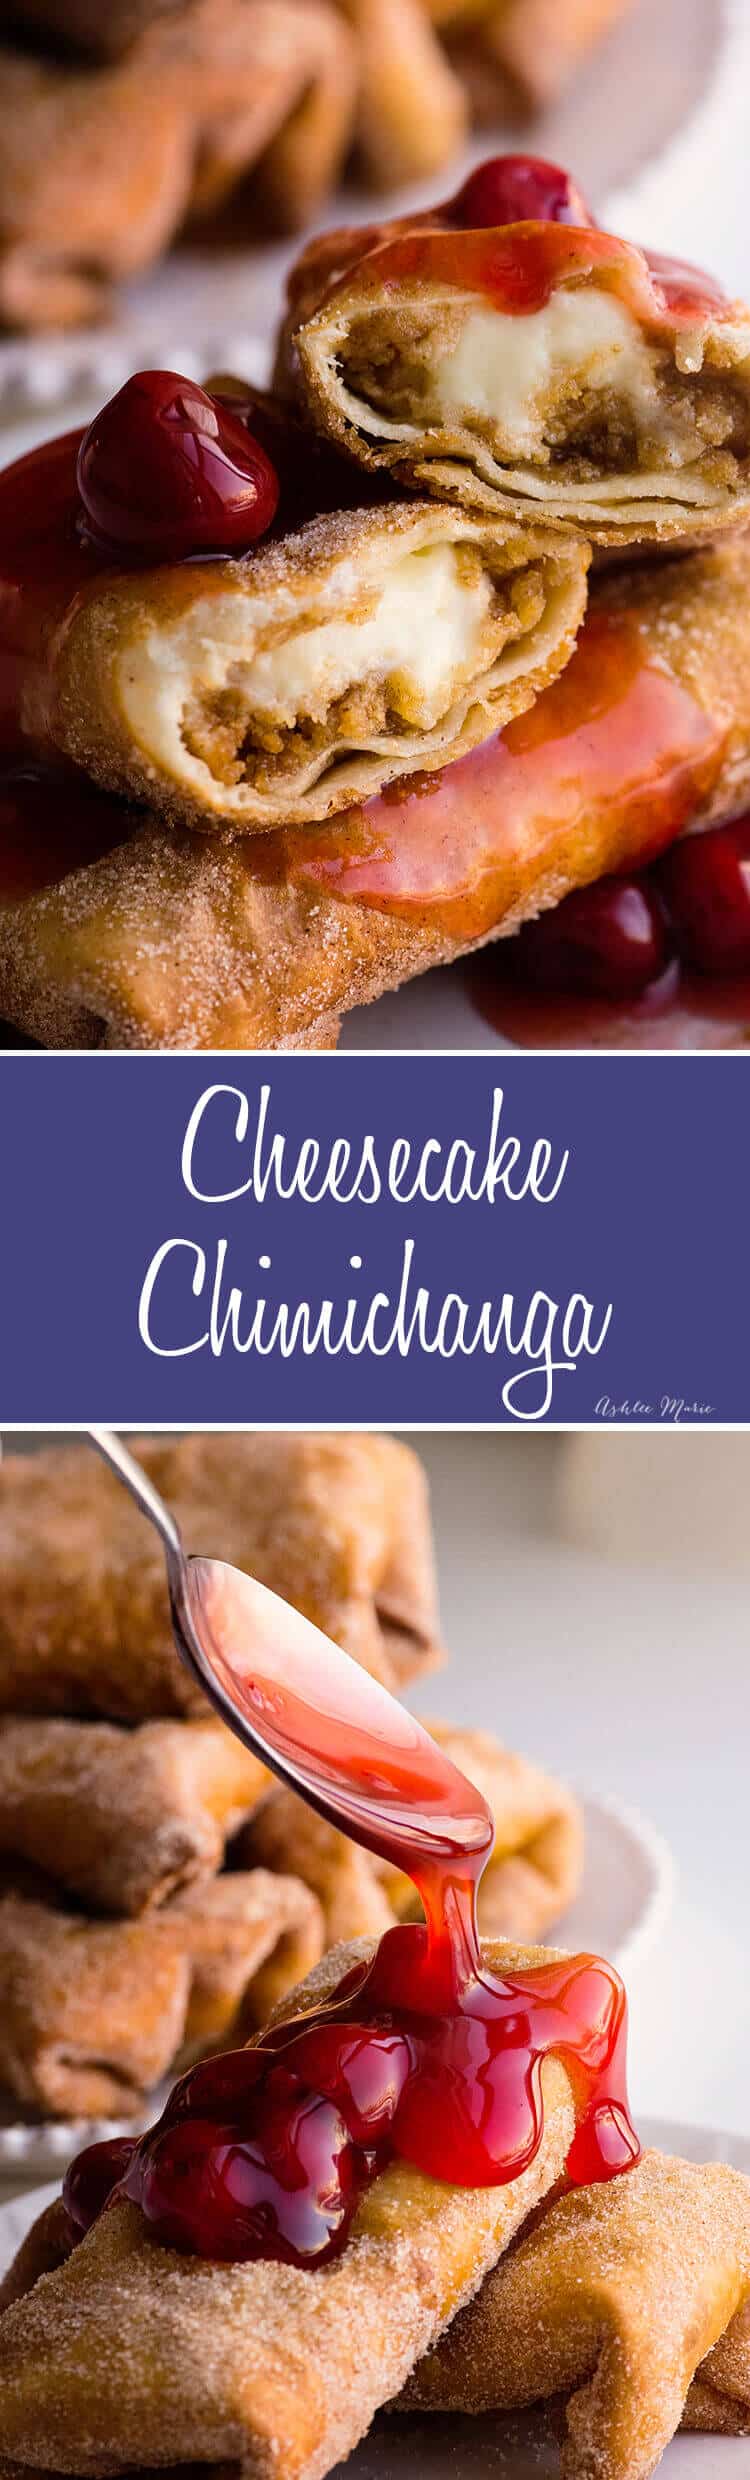 deep fried cheesecake chimichanga recipe and video tutorial - seriously delicious, easy to make and always a huge hit